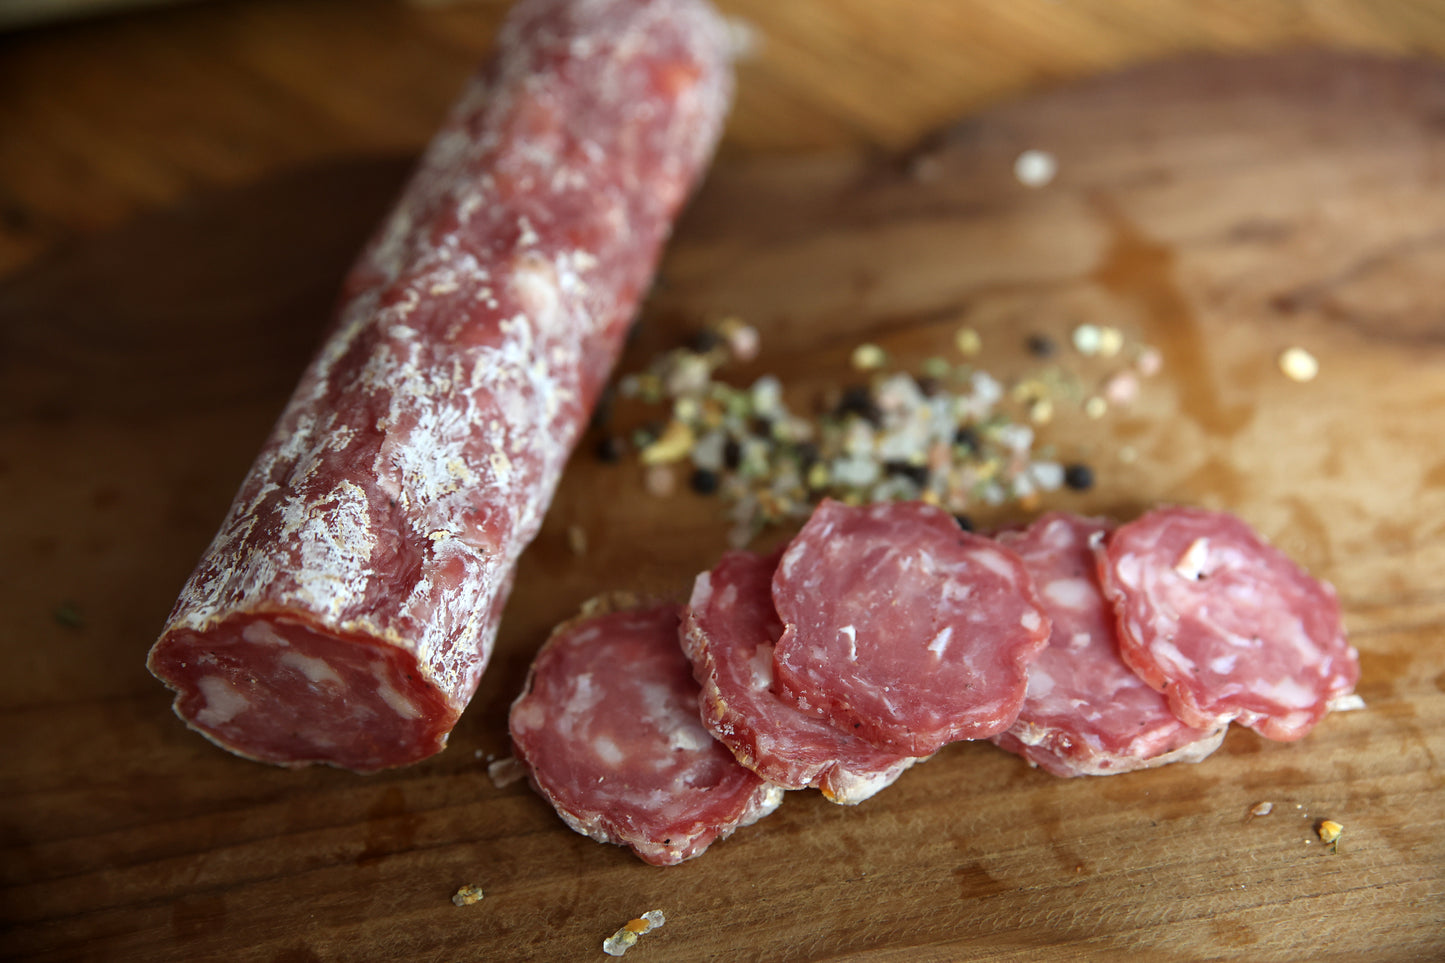 Salchichon Full Salami Approx 780g random weight packet. Regular price $25.00 AUD [You are guaranteed to receive at least 750g of product, equivalent price of $33.33 per kg.]